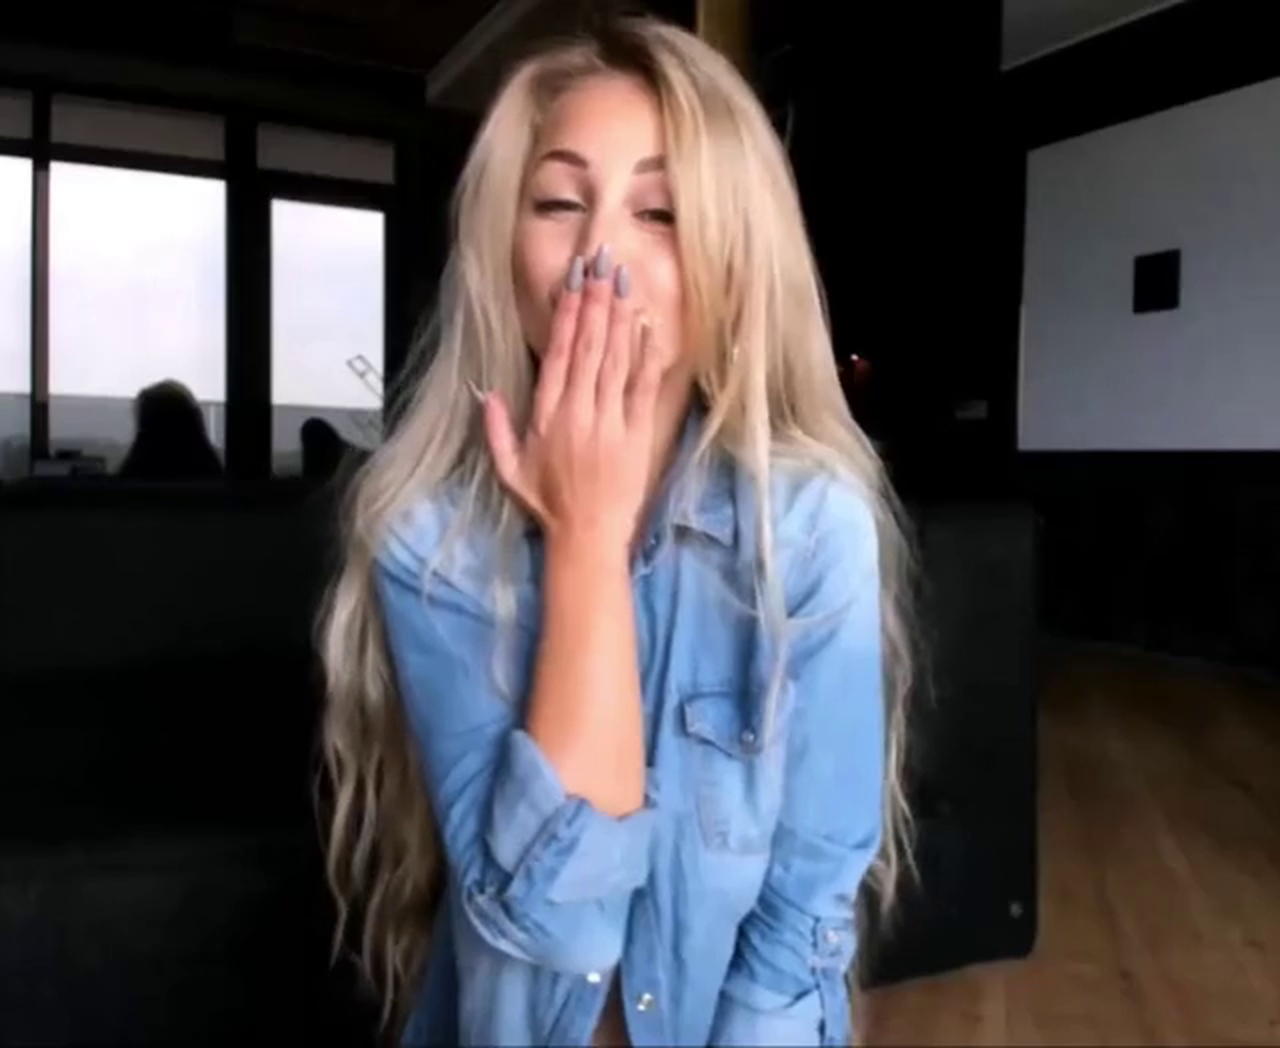 Video by IcePornHub.net with the username @IcePornHub,  January 15, 2019 at 1:19 PM. The post is about the topic Busty Chicks and the text says 'In A Denim Shirt (Sort Of)'